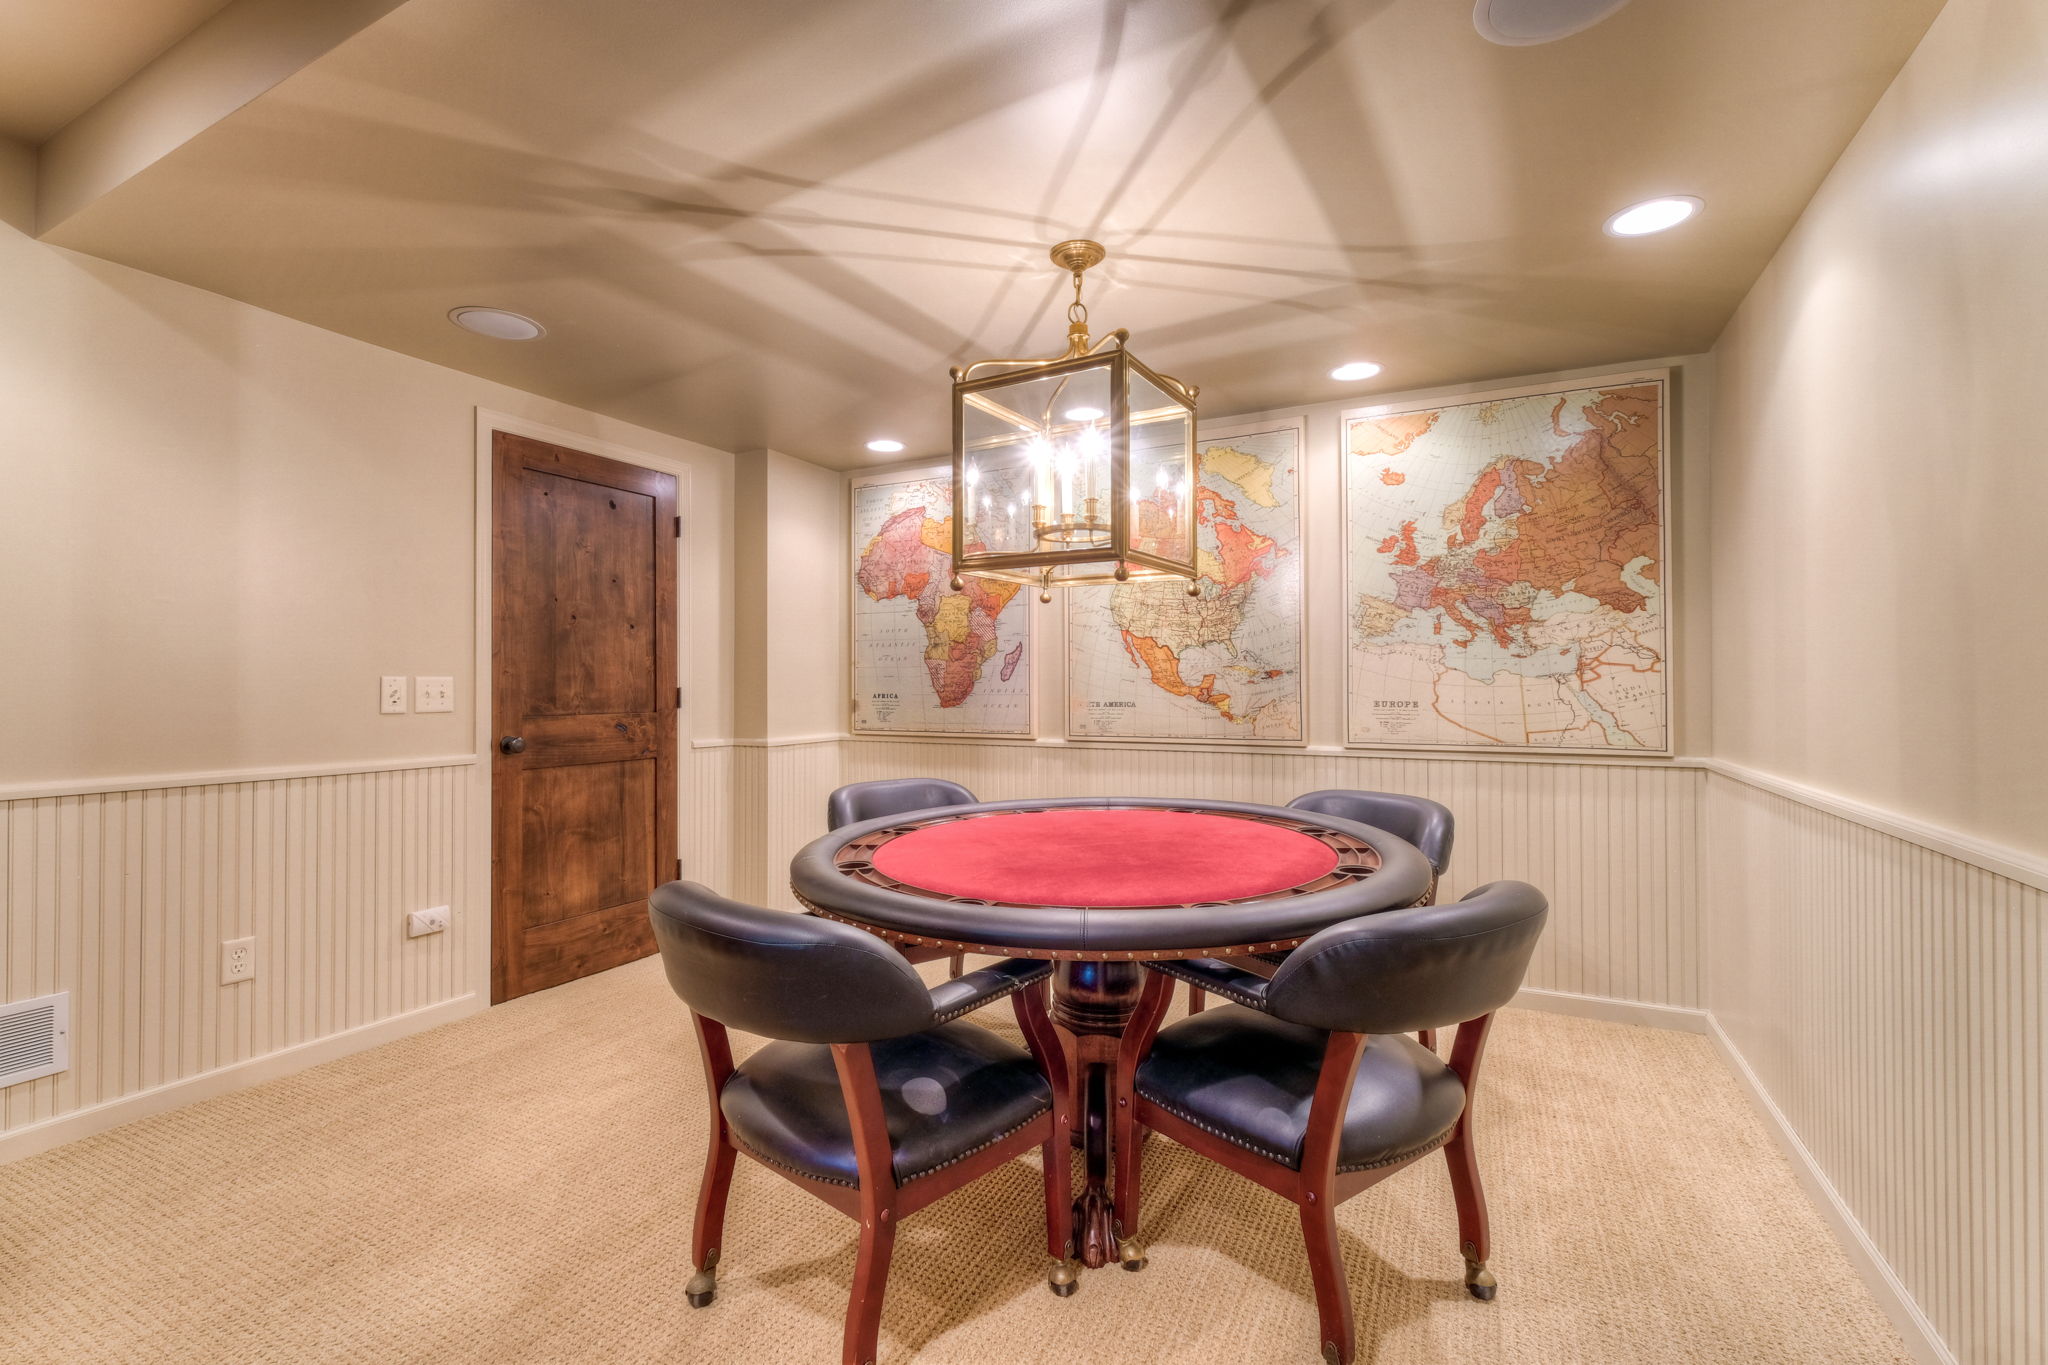 Recreation area of family room